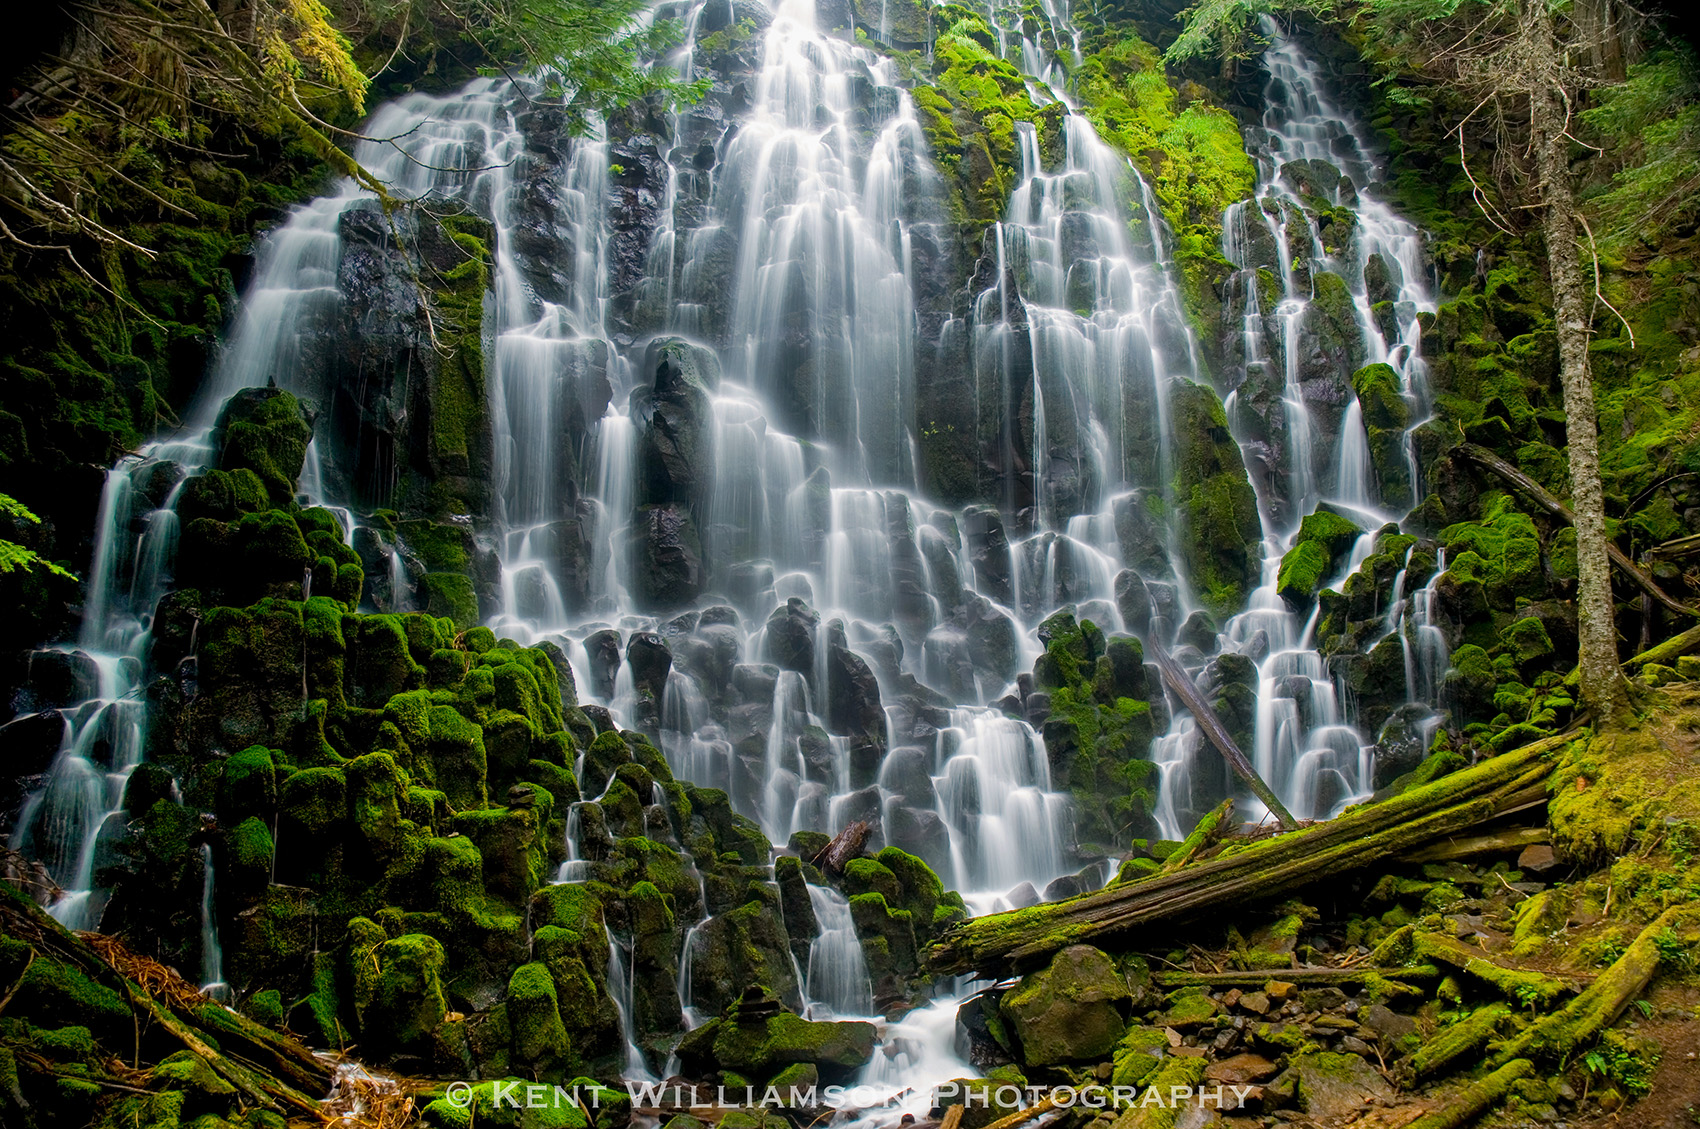 I took this photograph of Ramona Falls during a rainy day.  Ramona Falls is located on the West side of Mount Hood, Oregon.